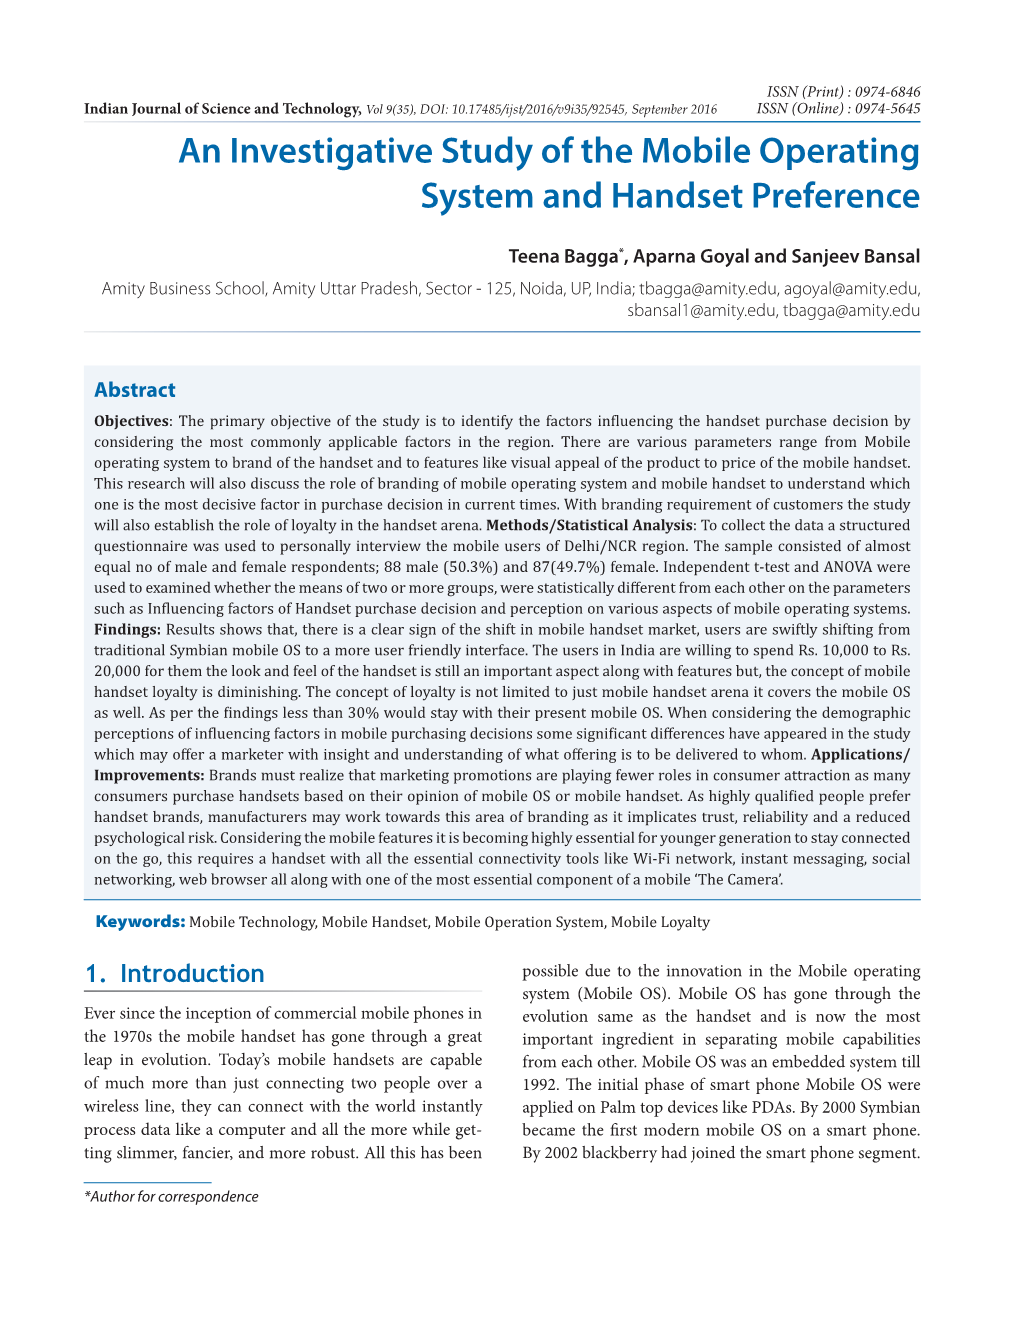 An Investigative Study of the Mobile Operating System and Handset Preference